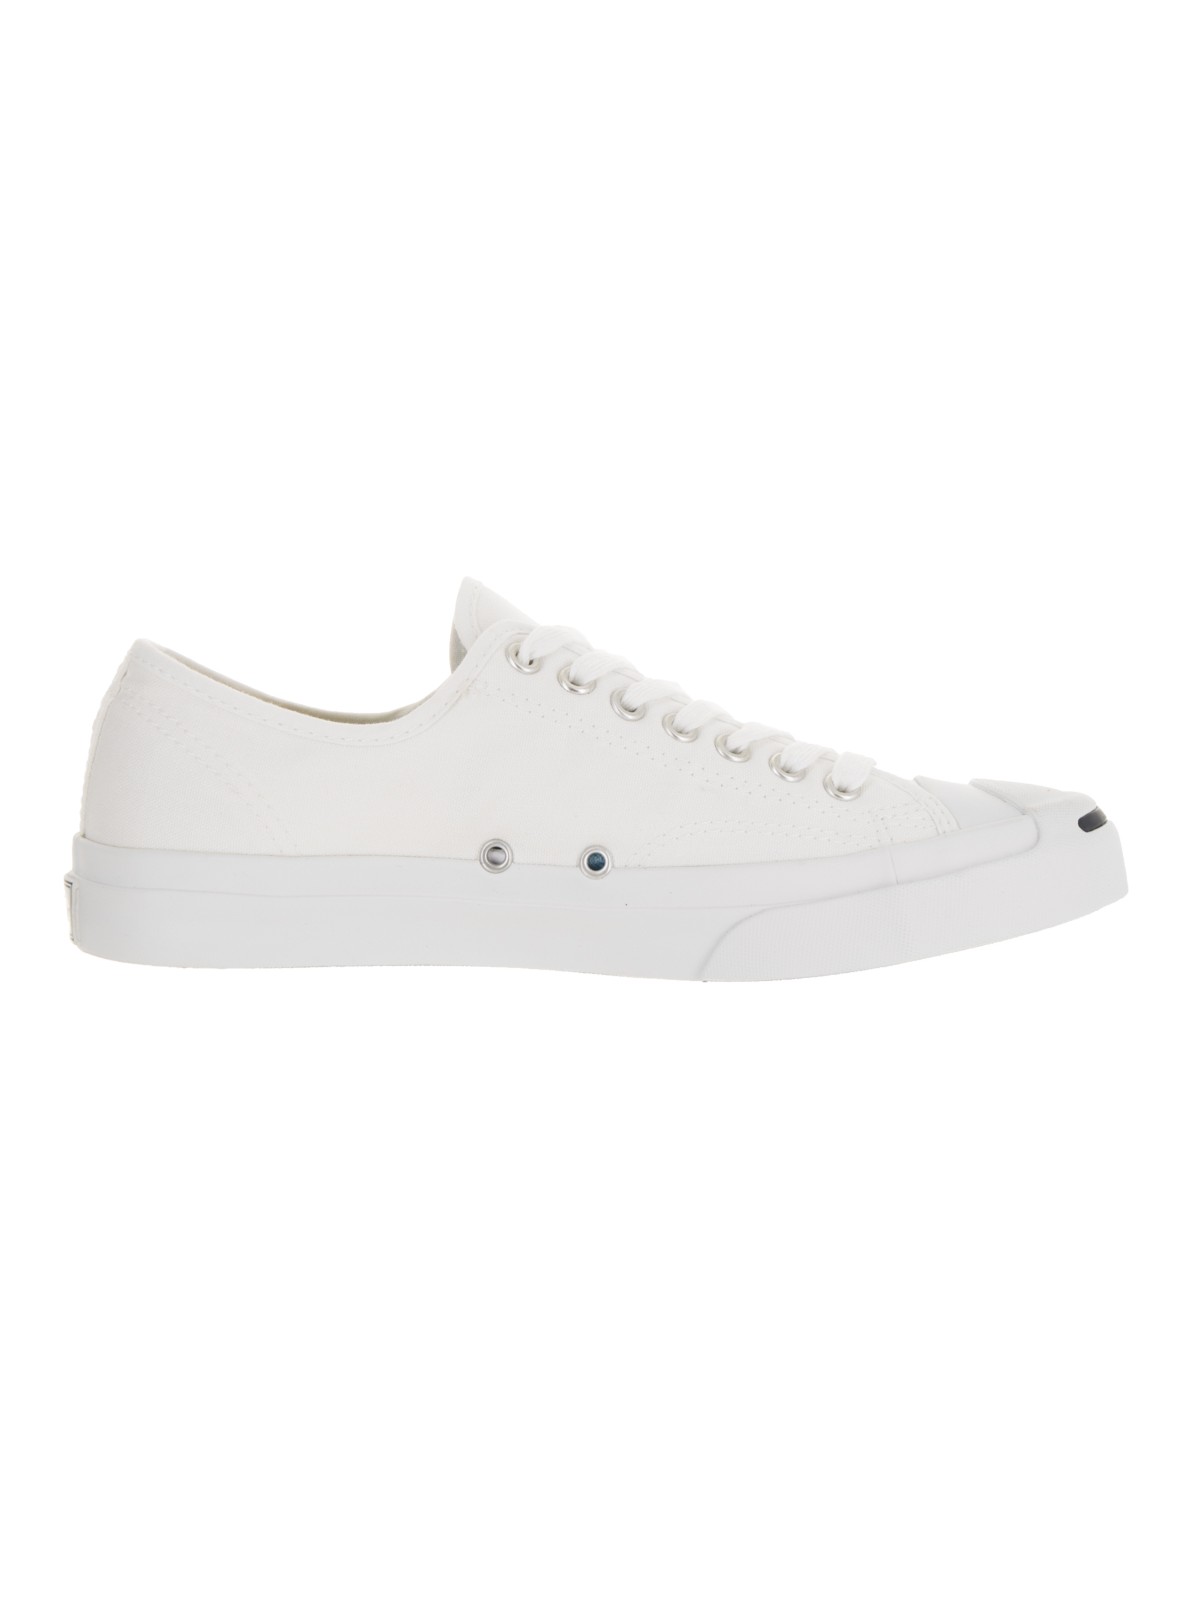 Converse Unisex Jack Purcell Cp Ox Casual Shoe - image 2 of 5